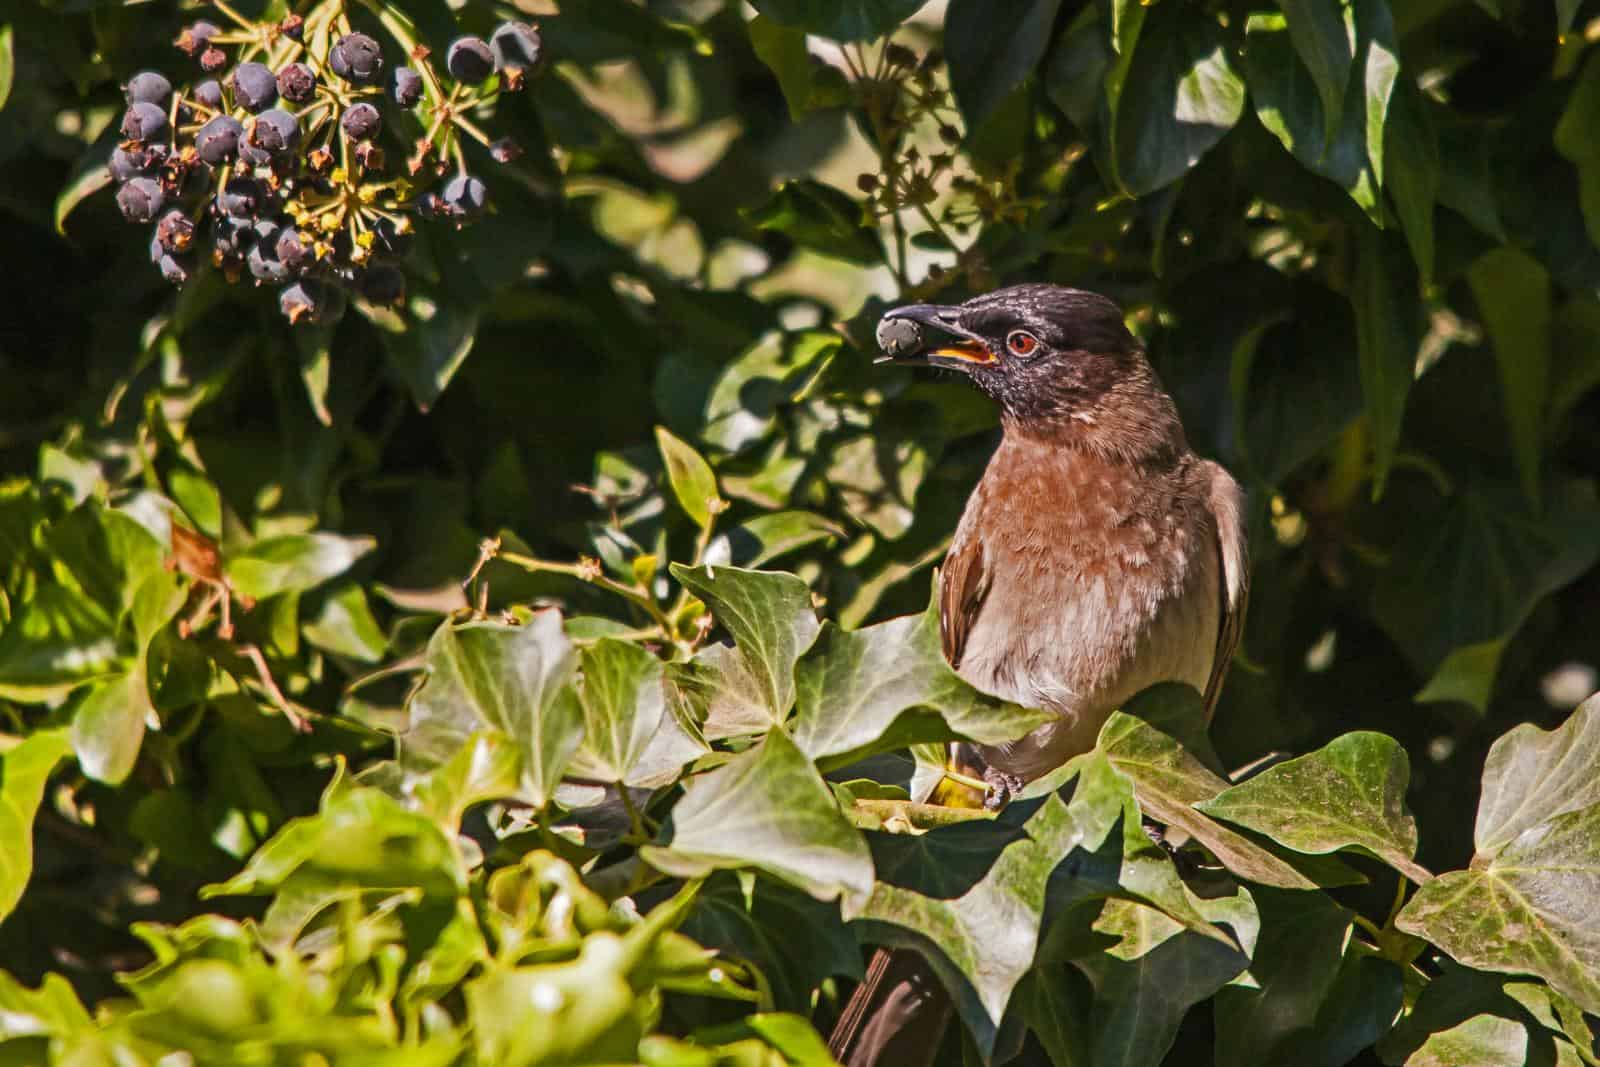 A bulbul bird perched on a branch, holds a plump blueberry fruit in its beak, ready to feast.